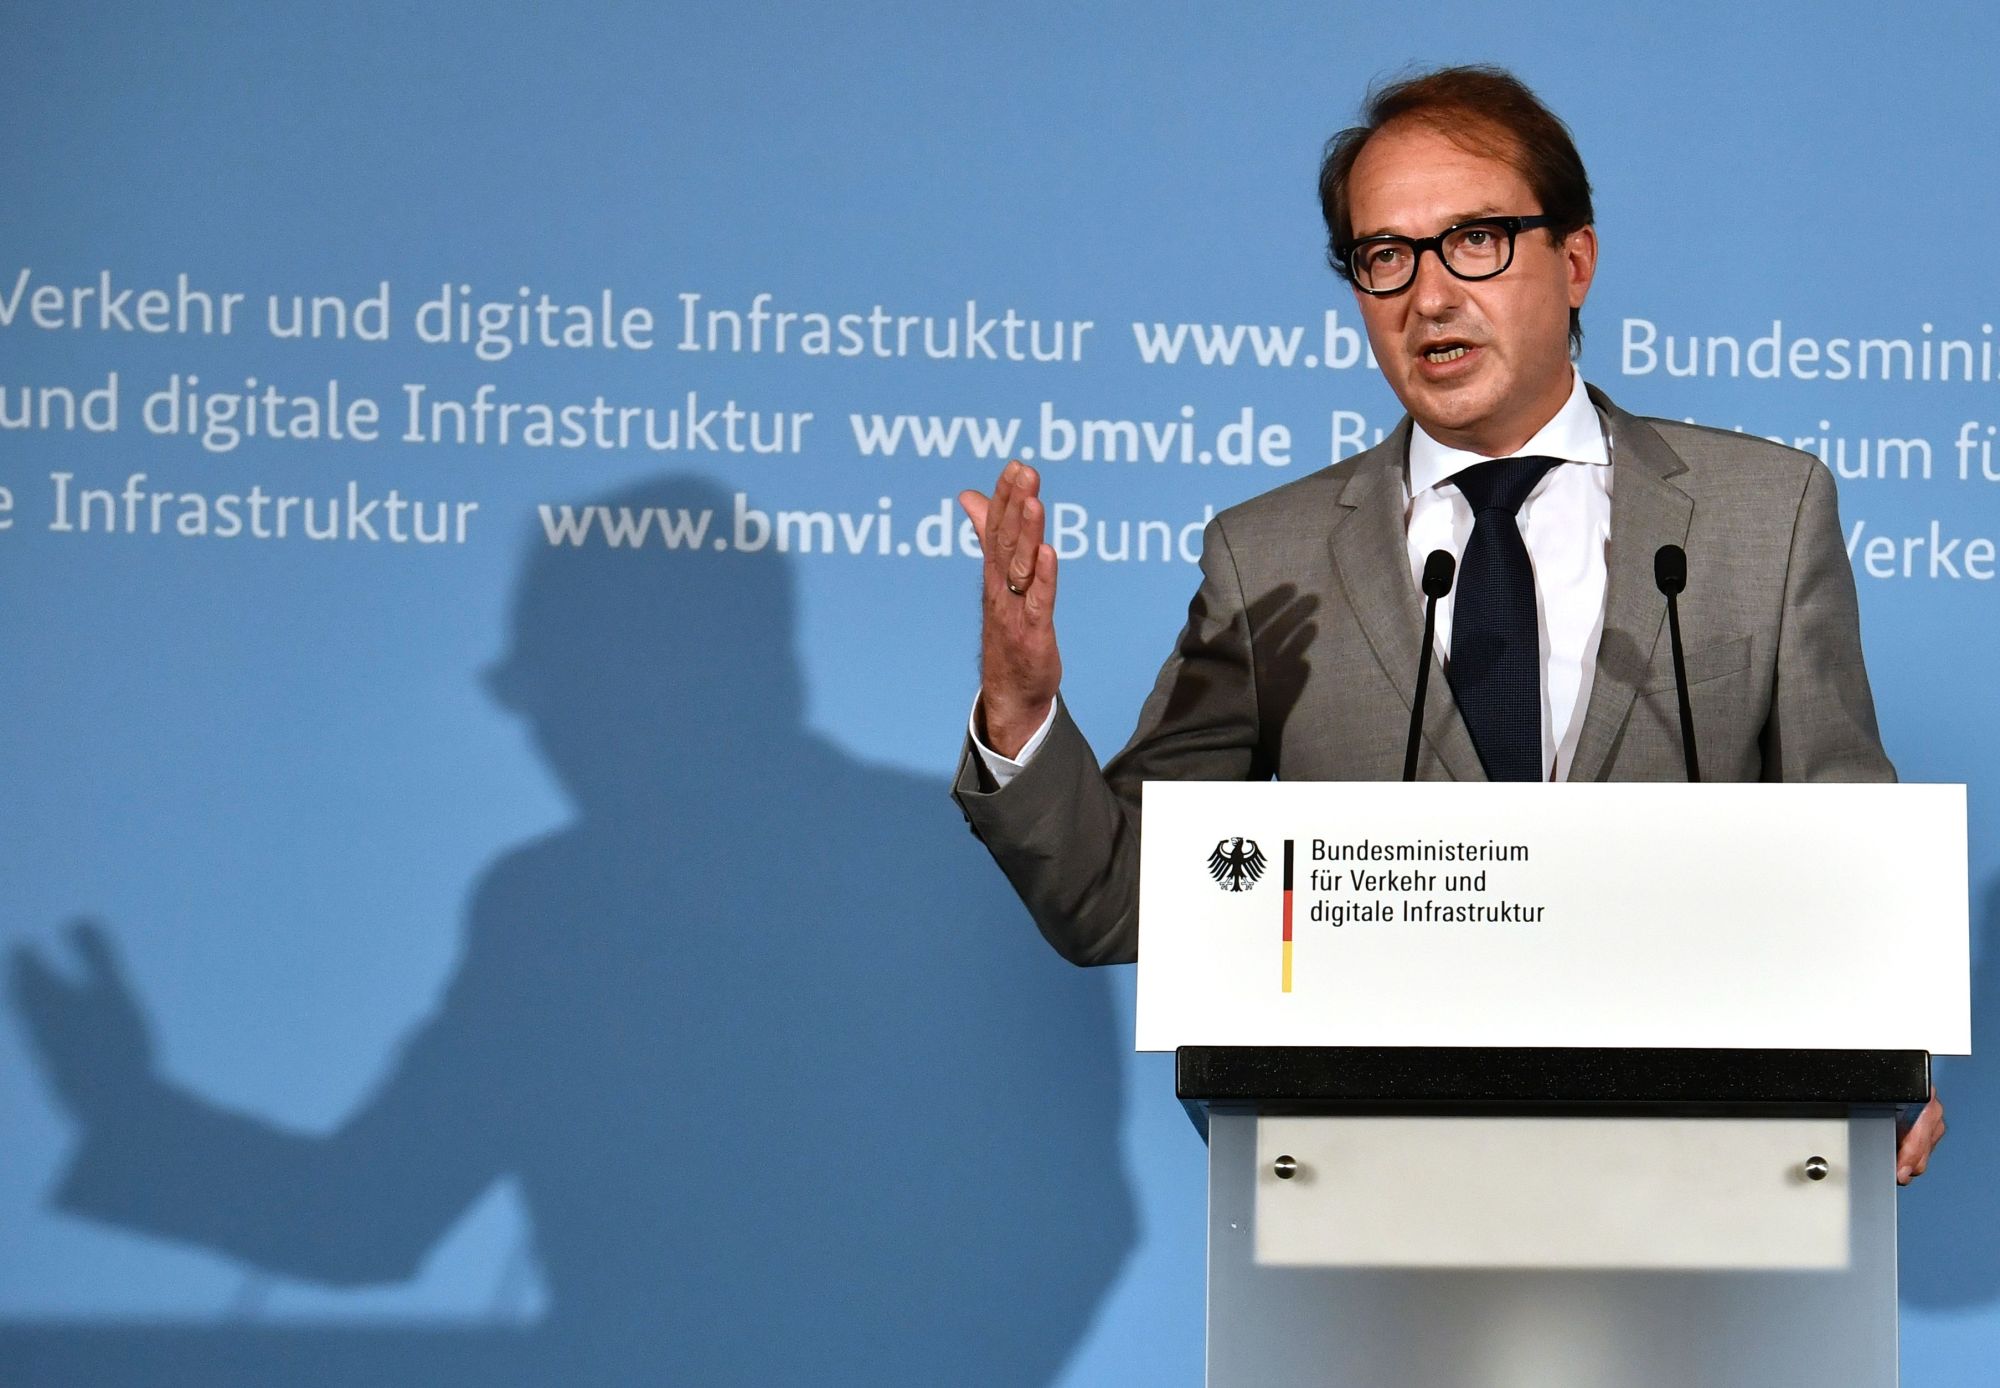 German Transport minister Alexander Dobrindt attends a news conference in Berlin on Thursday amid scandals around diesel emissions and a suspected carmaker's cartel involving Germany's top brands. | AFP-JIJI